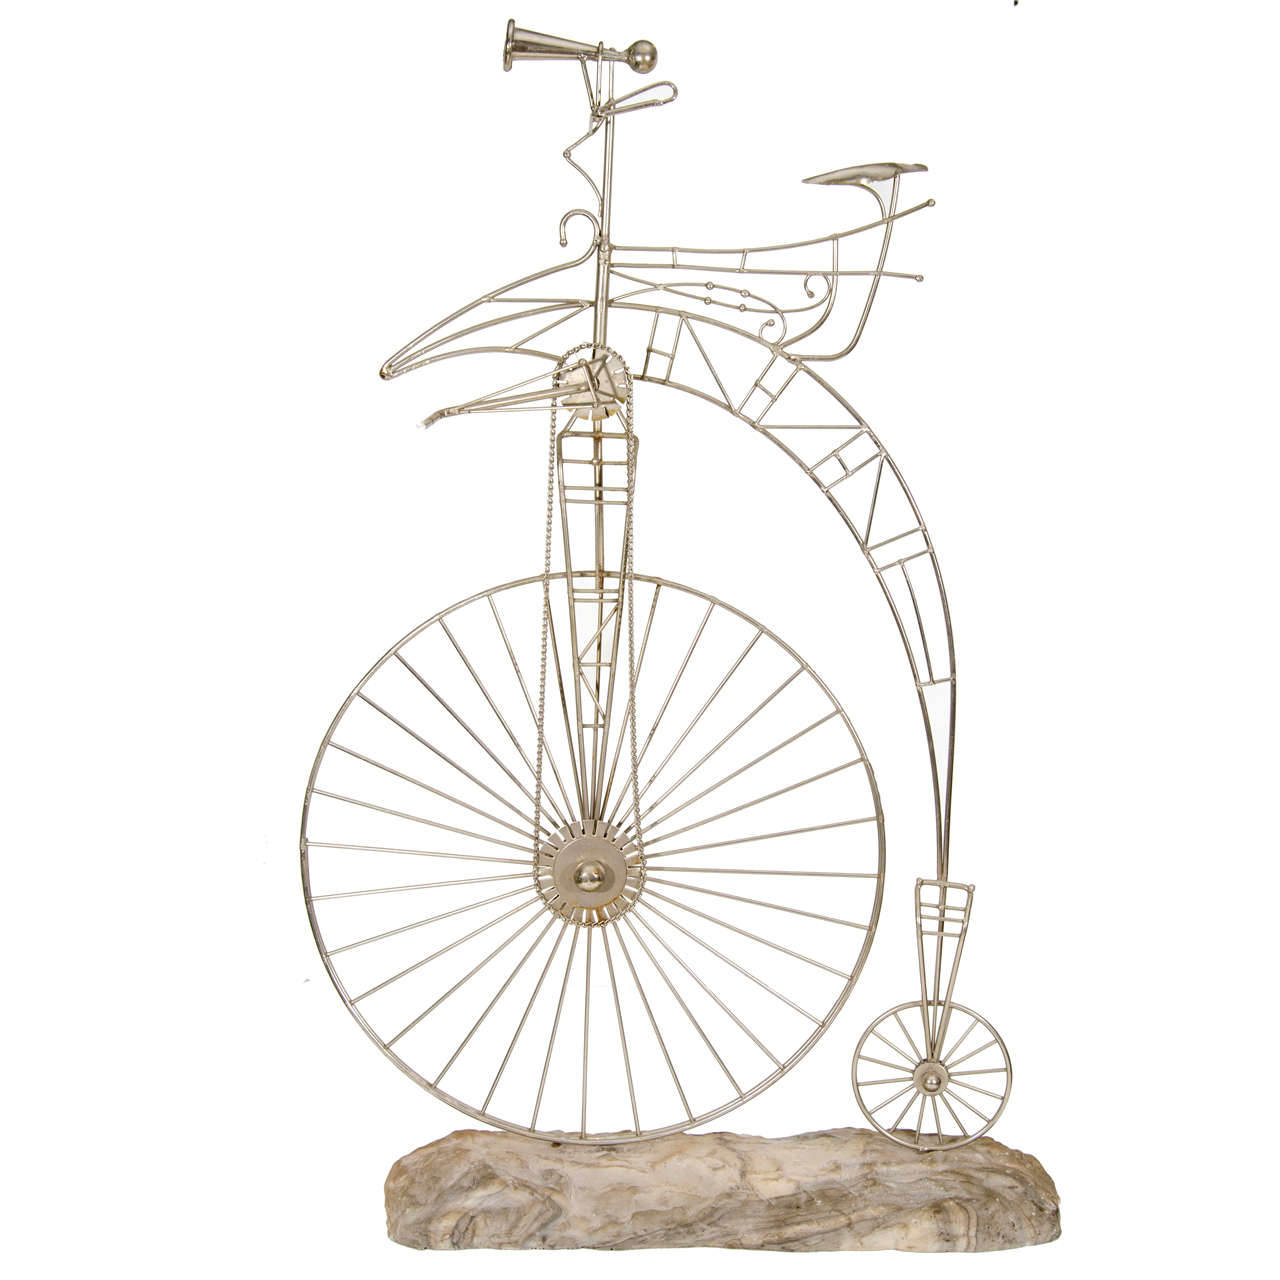 Penny Farthing Bicycle Sculpture